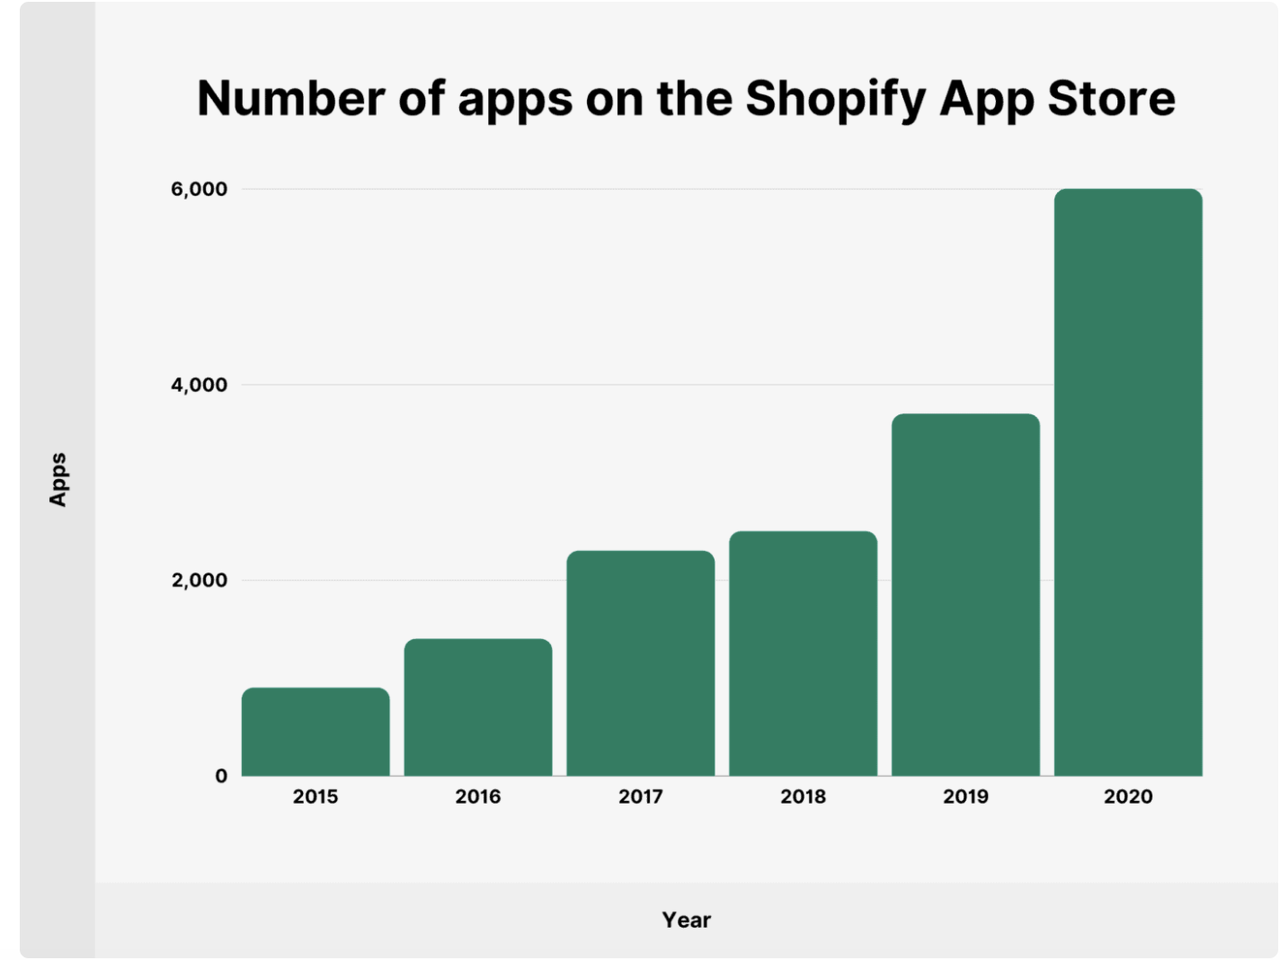 Number of apps on Shopify app store